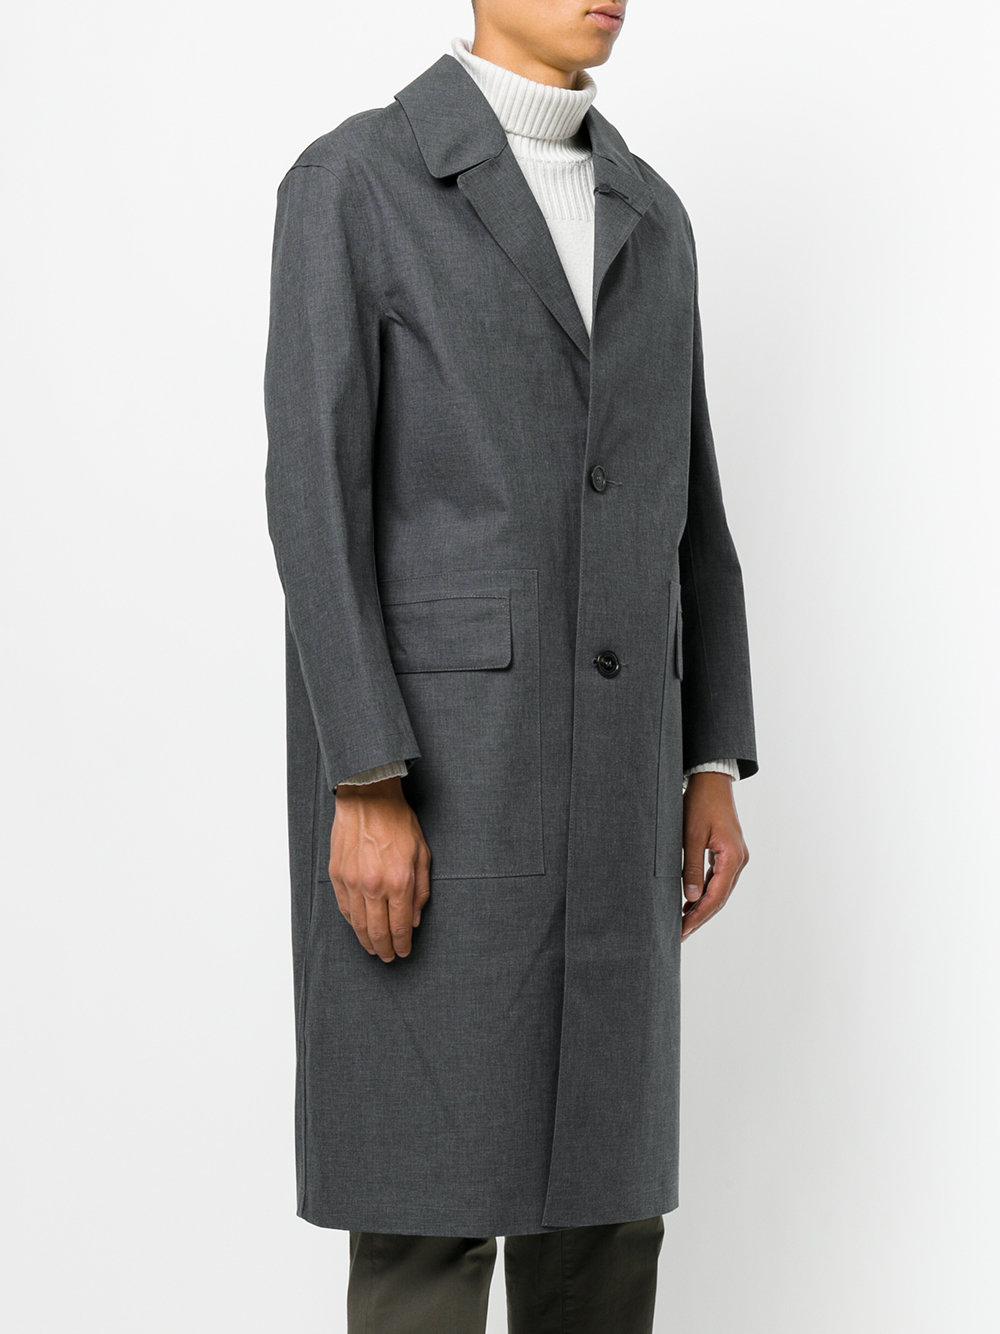 Mackintosh Cotton Single Breasted Coat in Grey (Gray) for Men - Lyst